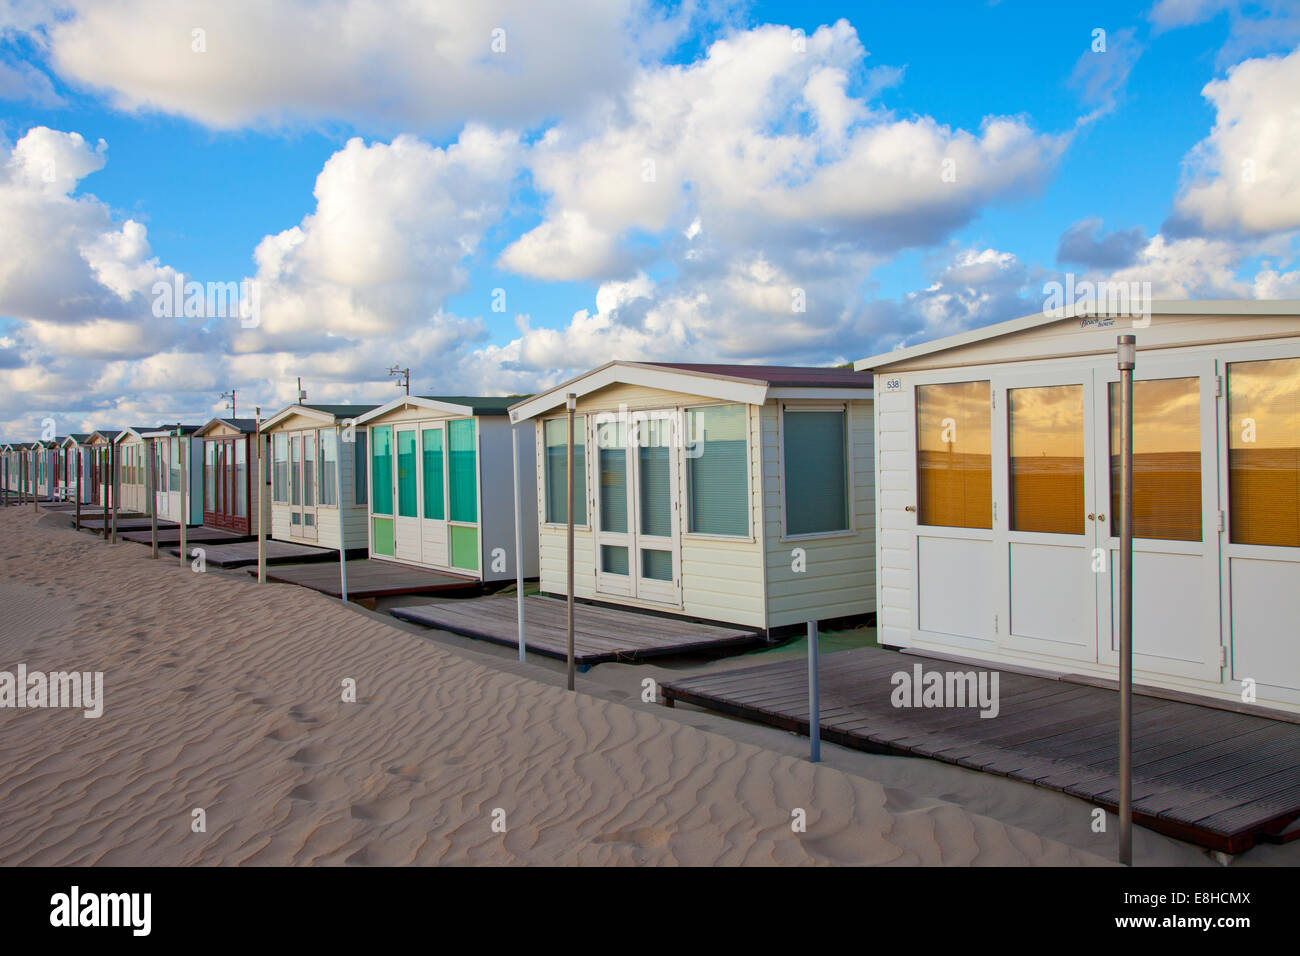 Several beachhouses in a row on beach in The Netherlands Stock Photo